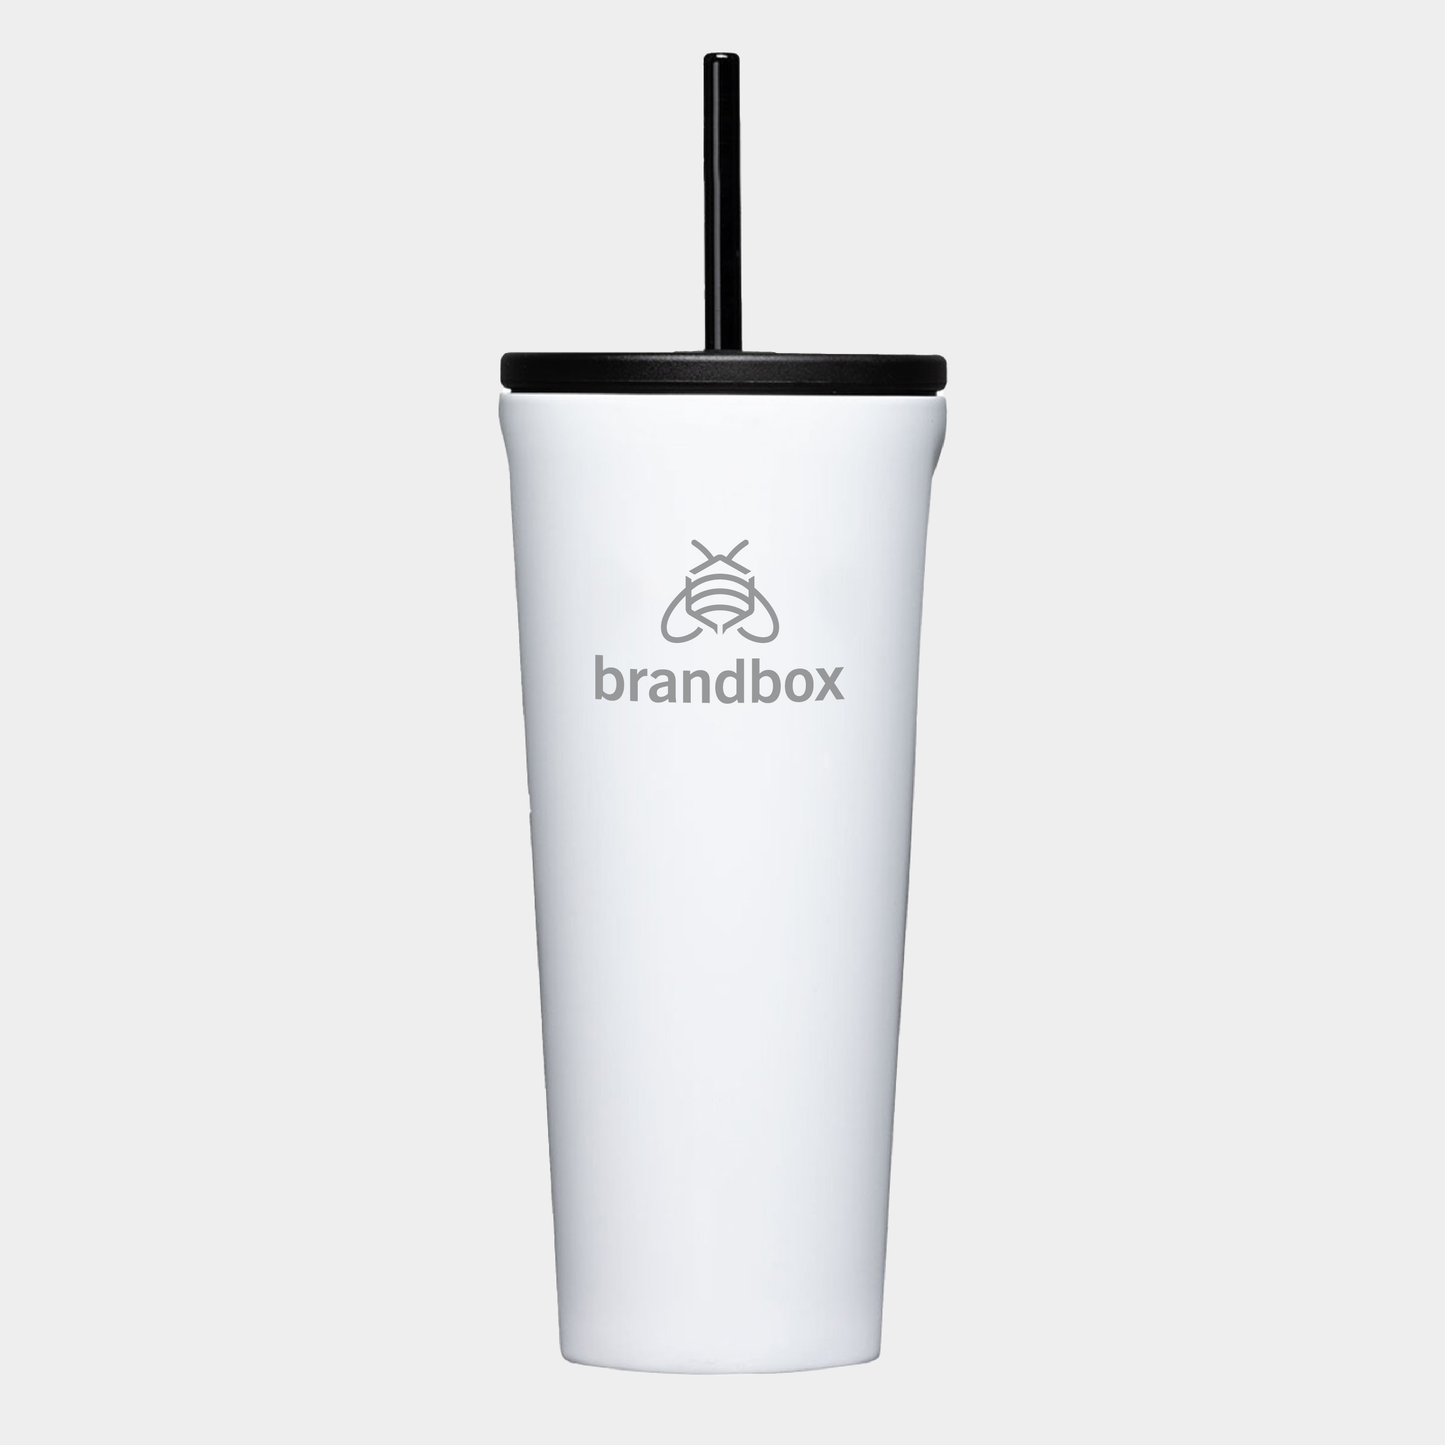 CORKCICLE® Cold Cup - 24 Oz.